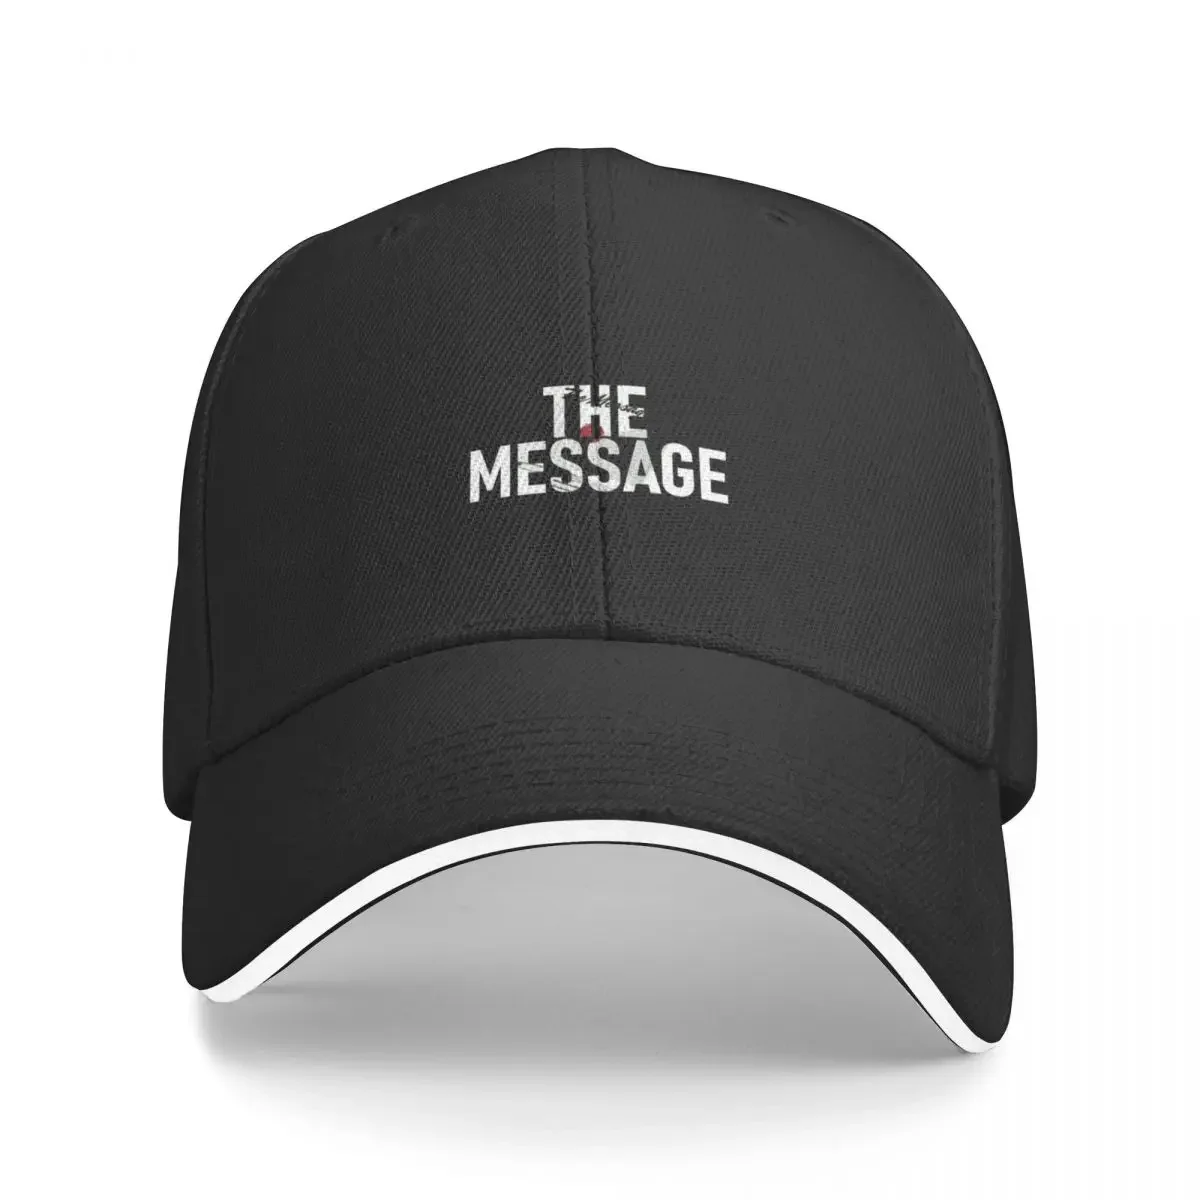 

The Message - ONEFOUR Baseball Cap Fishing cap Rugby Snap Back Hat Caps For Men Women's